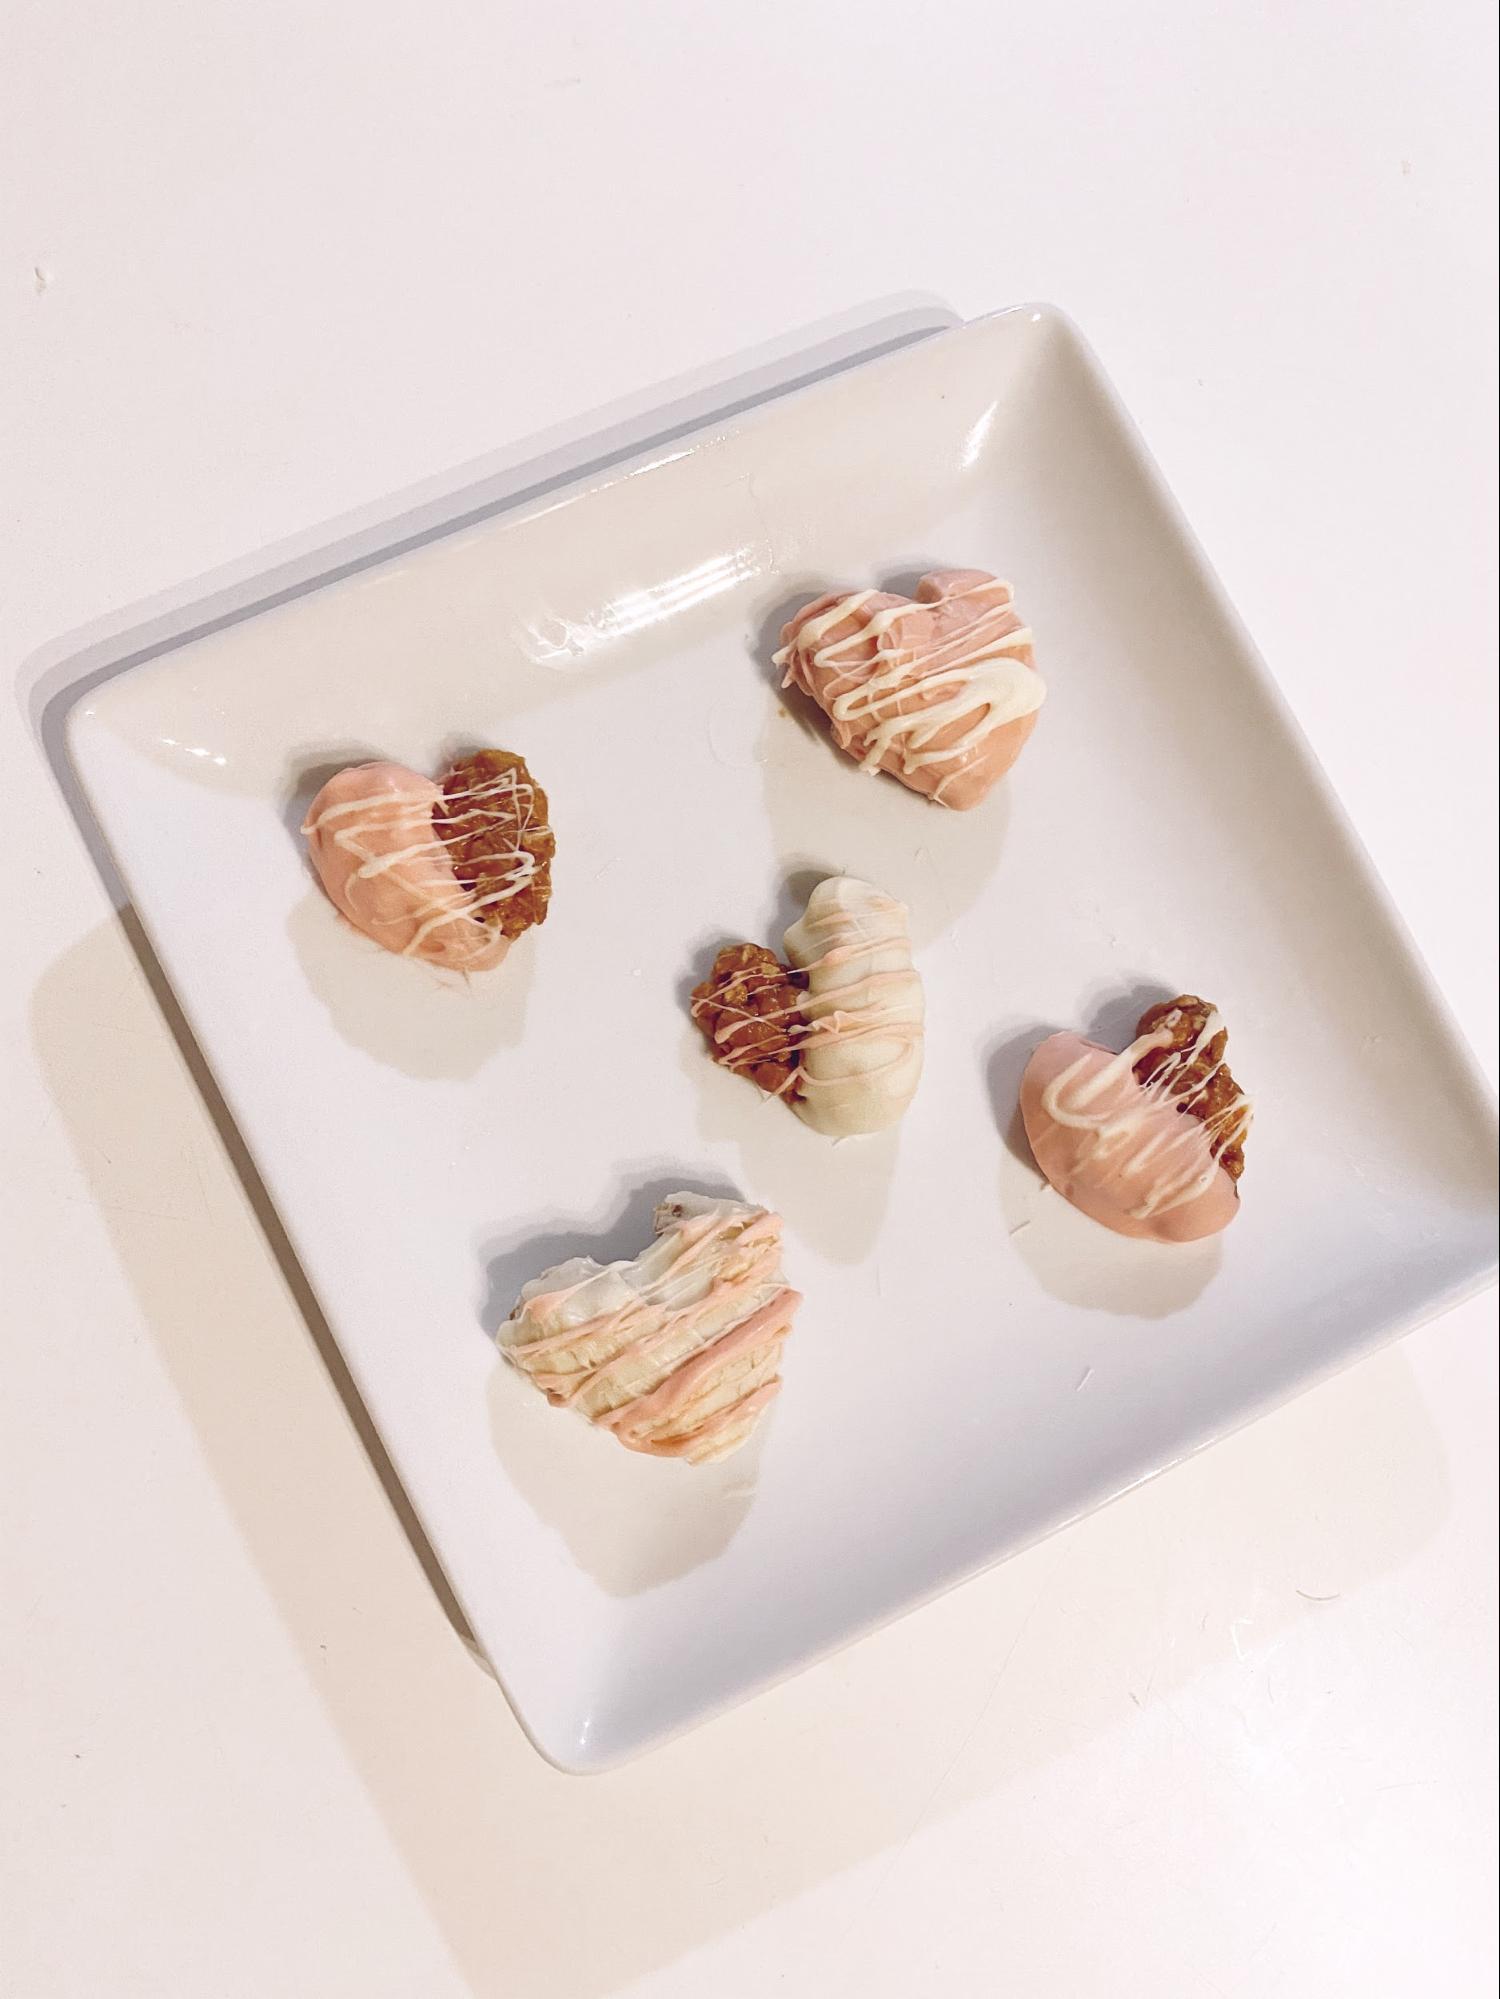 Heart-Shaped Collagen Granola Clusters with Drizzled Chocolate